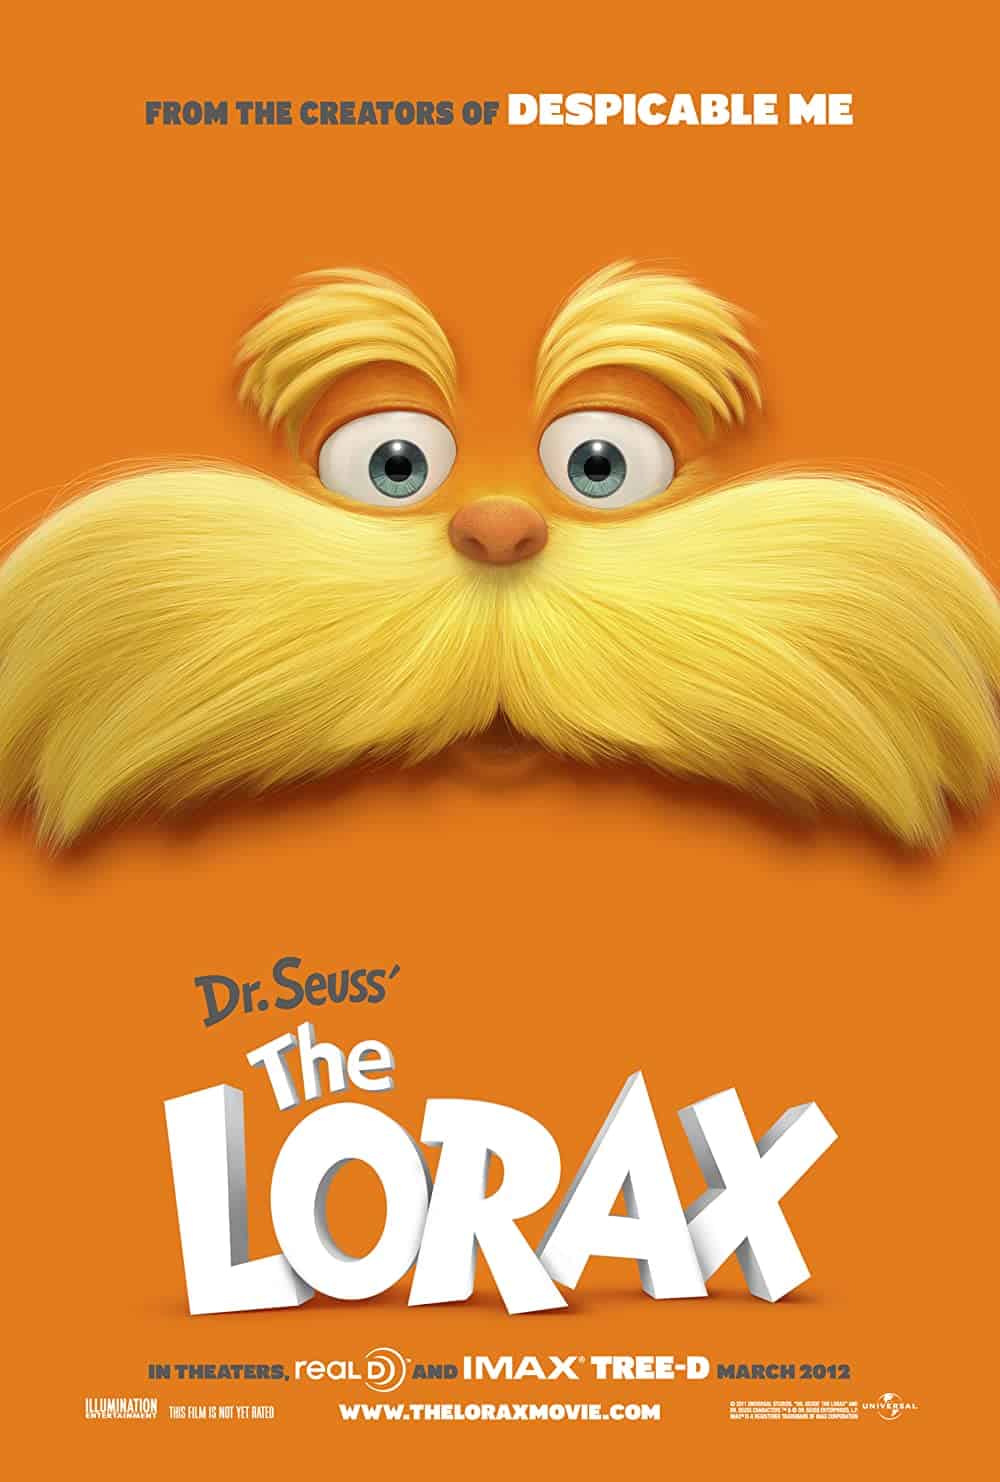 The Lorax (2012) 15 Best Nature Movies to Add in Your Watchlist